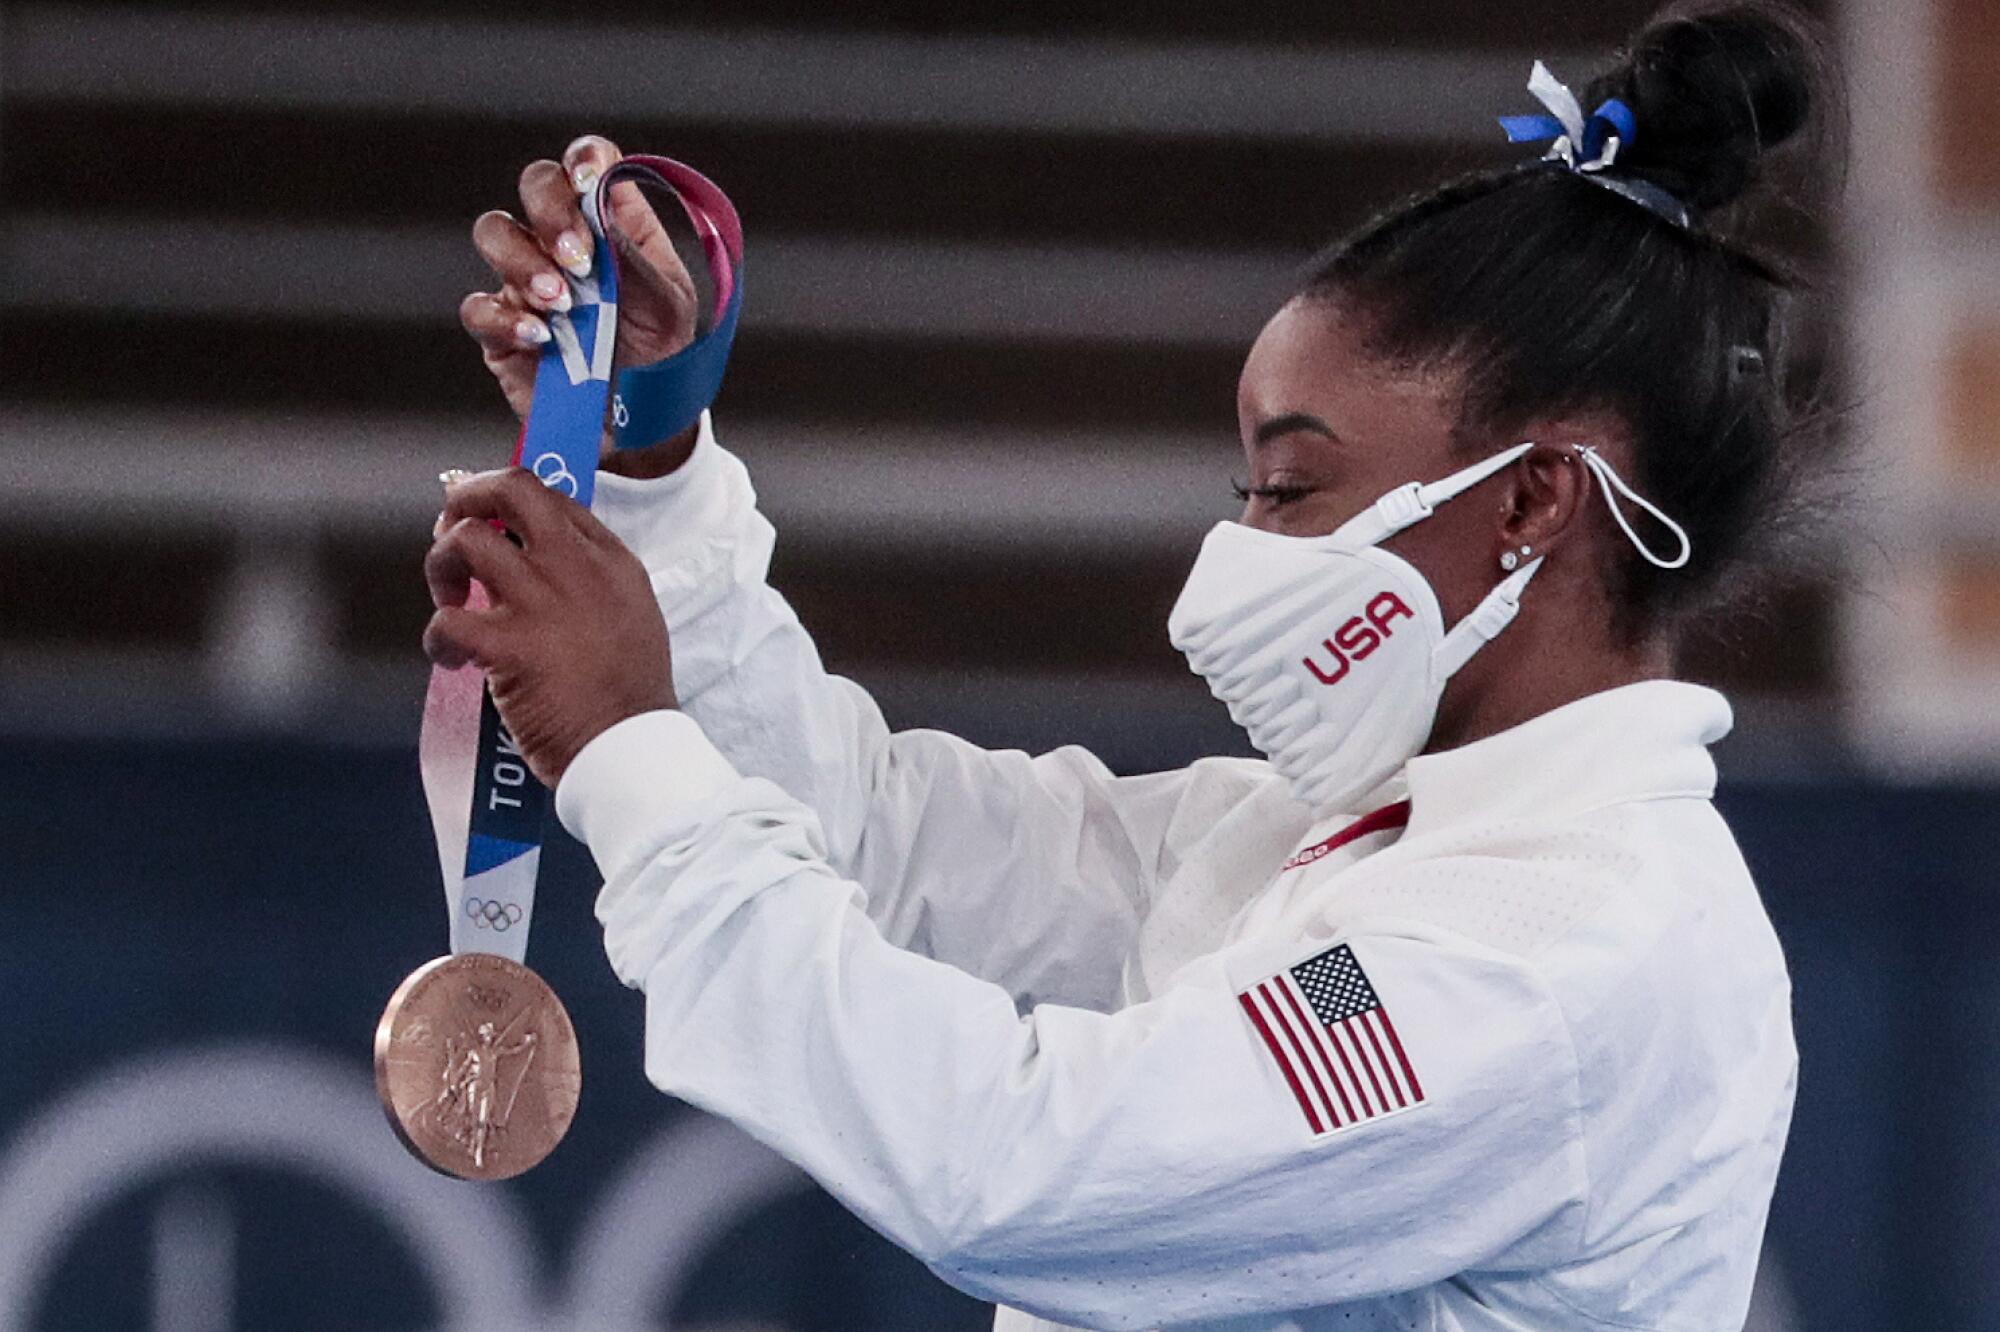 Simone Biles holds the bronze medal she won in the balance beam final.